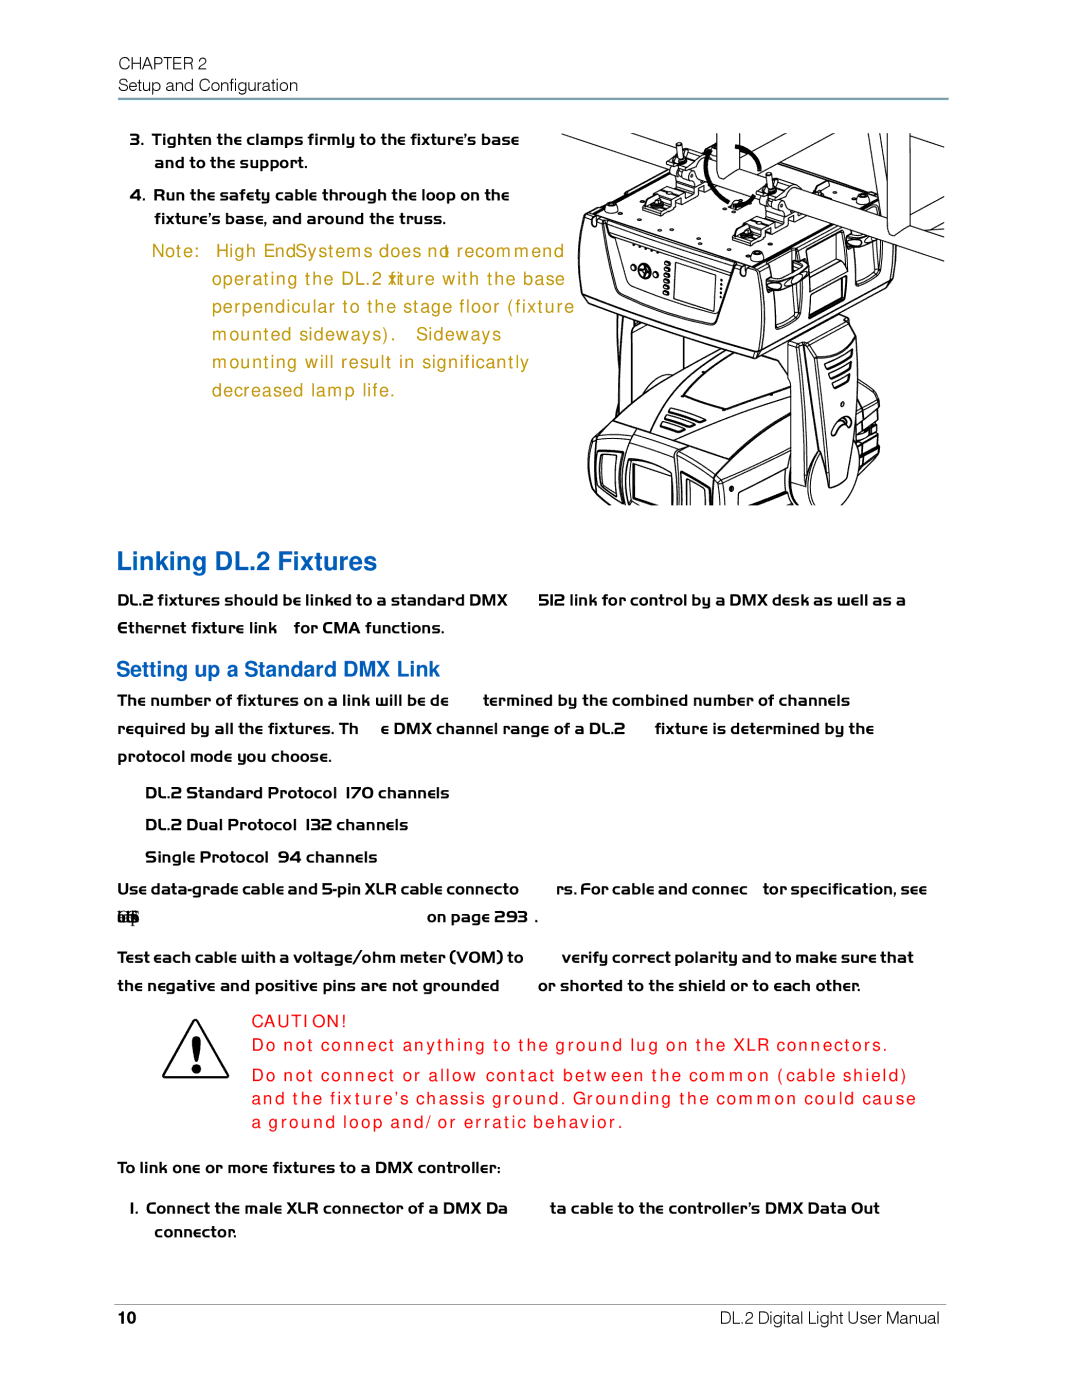 High End Systems user manual Linking DL.2 Fixtures, Setting up a Standard DMX Link 